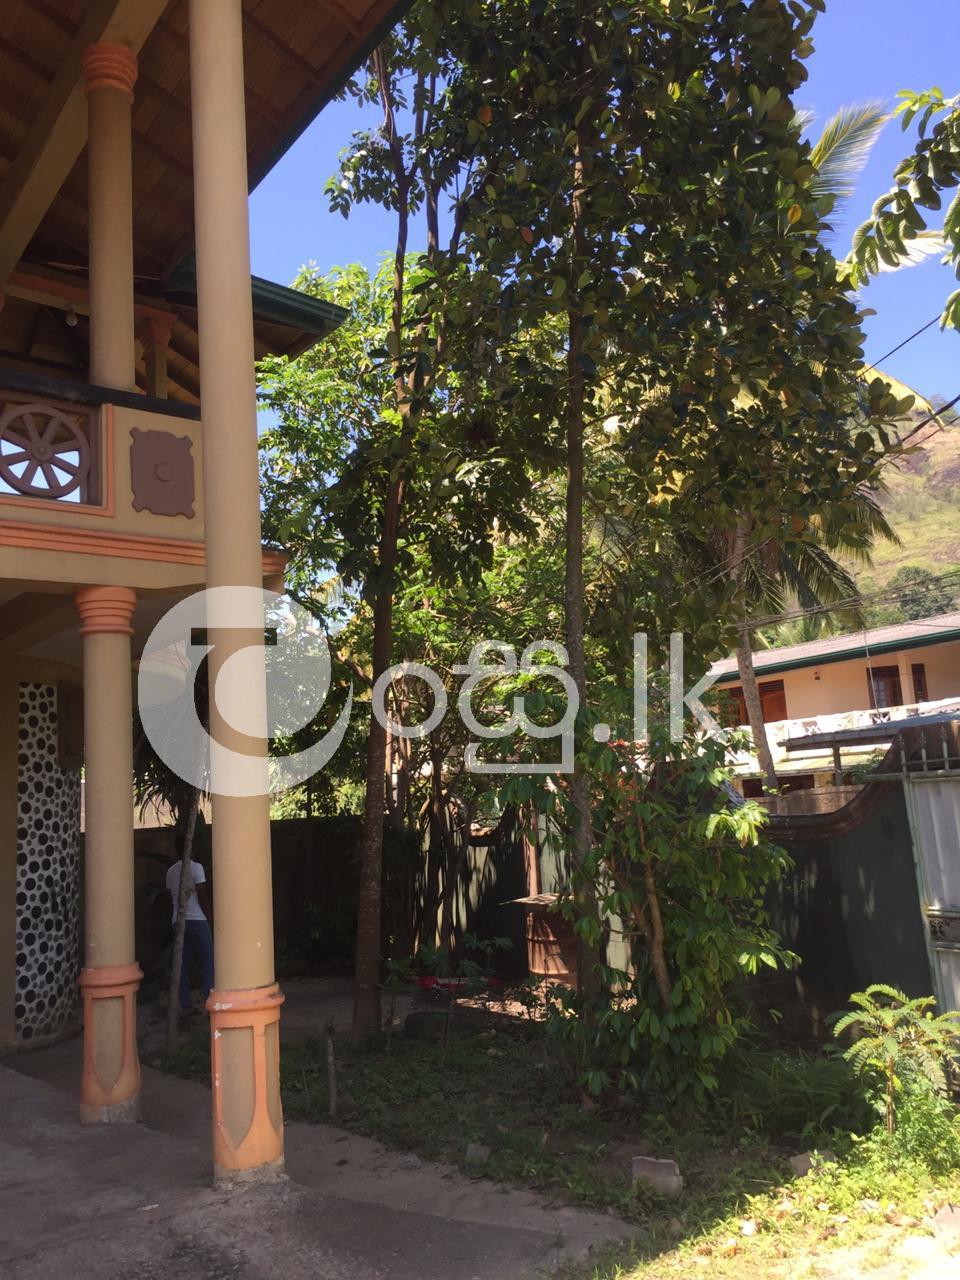 House for sale in Kandy Ilukwatha Houses in Kandy